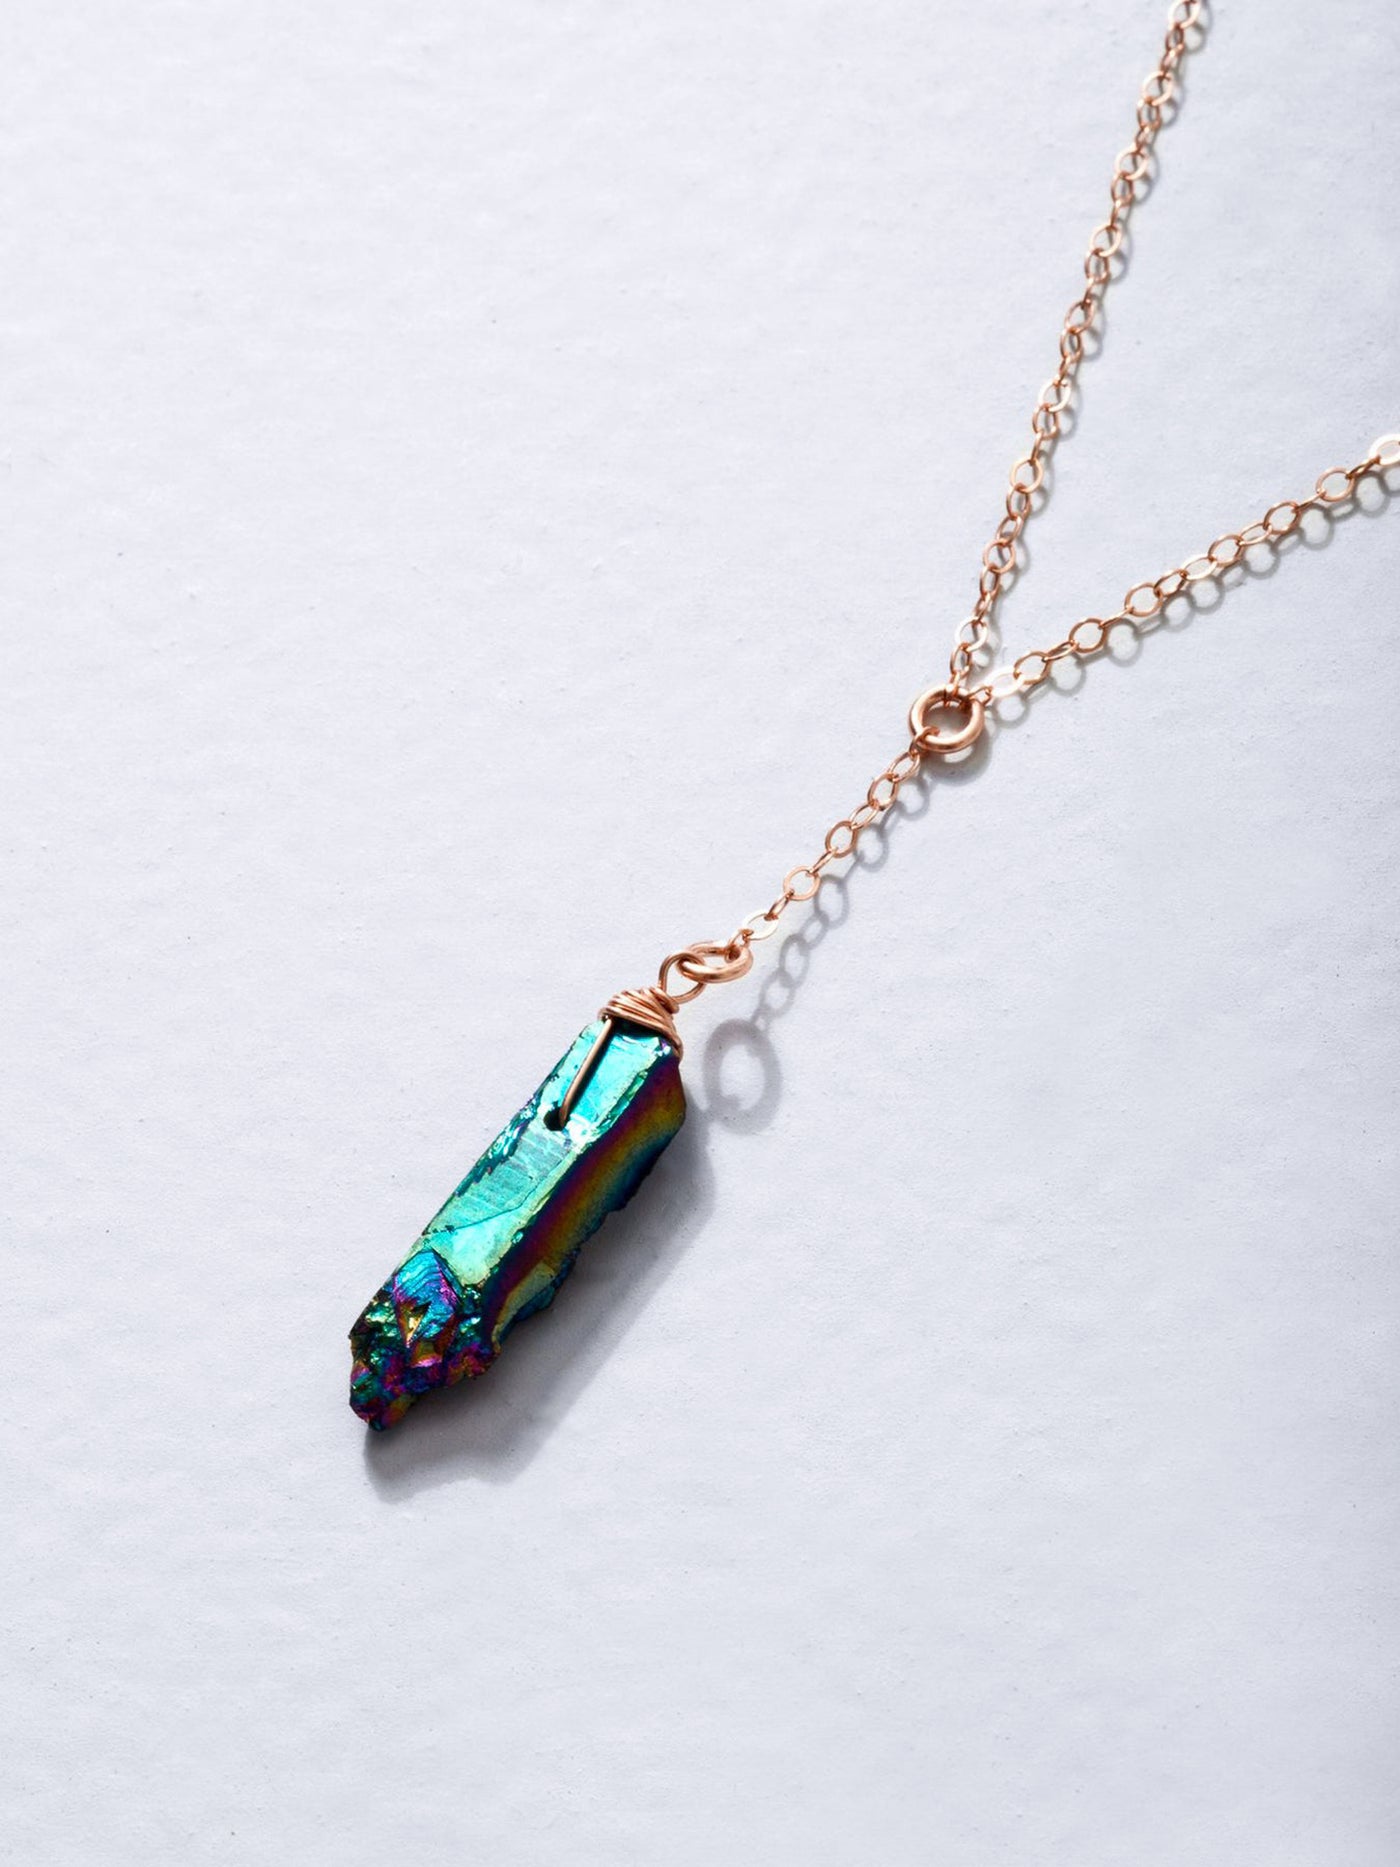 Rainbow Quartz Gold Lariat Necklace. This rainbow titanium coated quartz crystals is delicately wire wrapped and attached to high quality 14k yellow gold filled lariat style chain. Necklace length is adjustable 17-18".